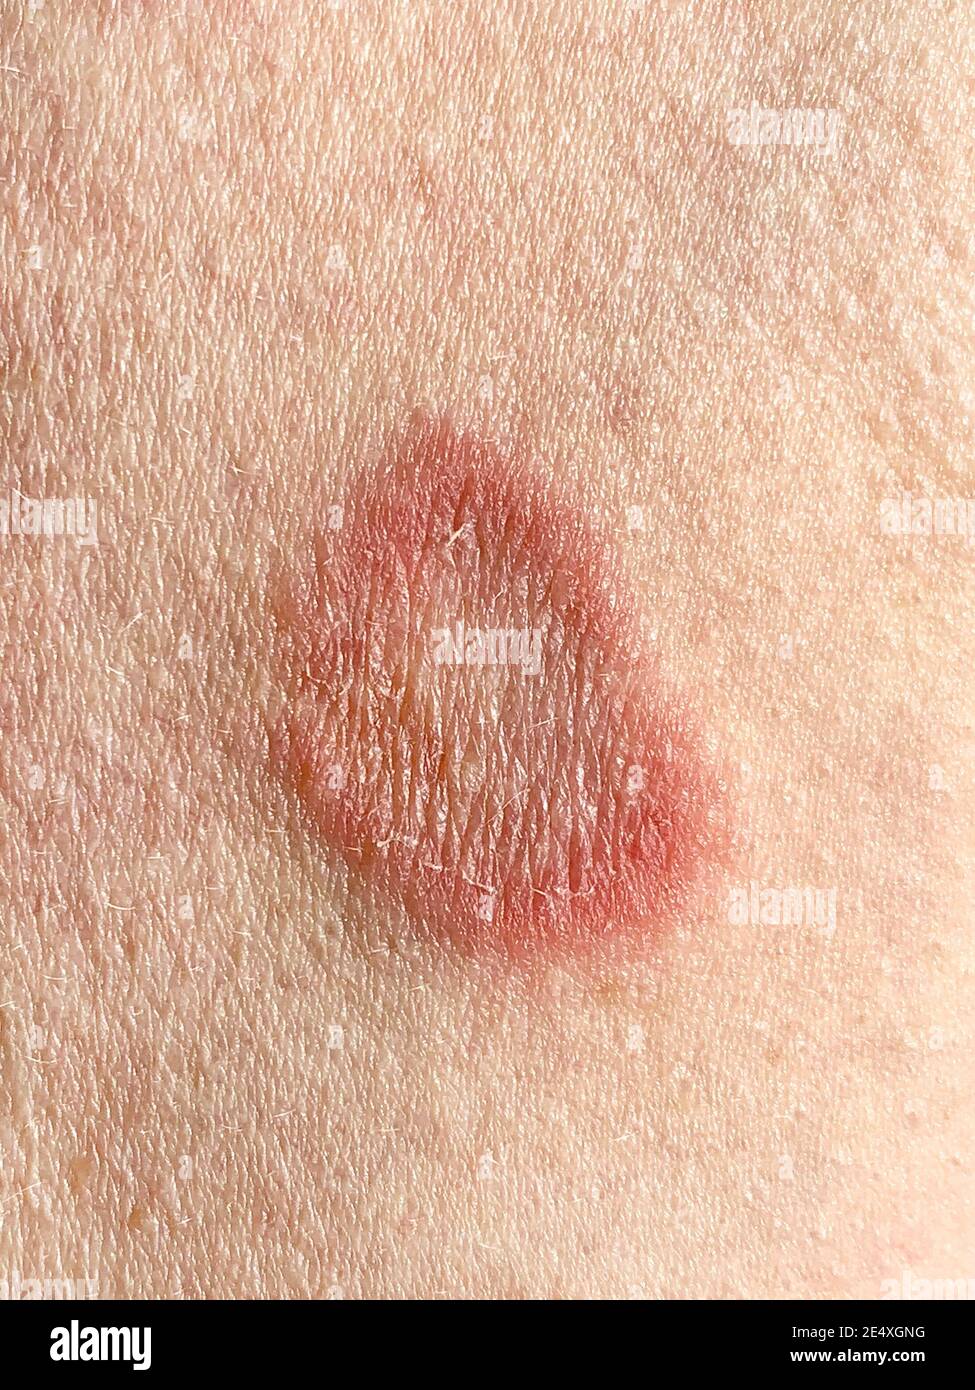 Ringworm infection on the arm of a caucasian adult male. This fungal skin infection causes itching, redness and scaly skin and the rings are called pl Stock Photo